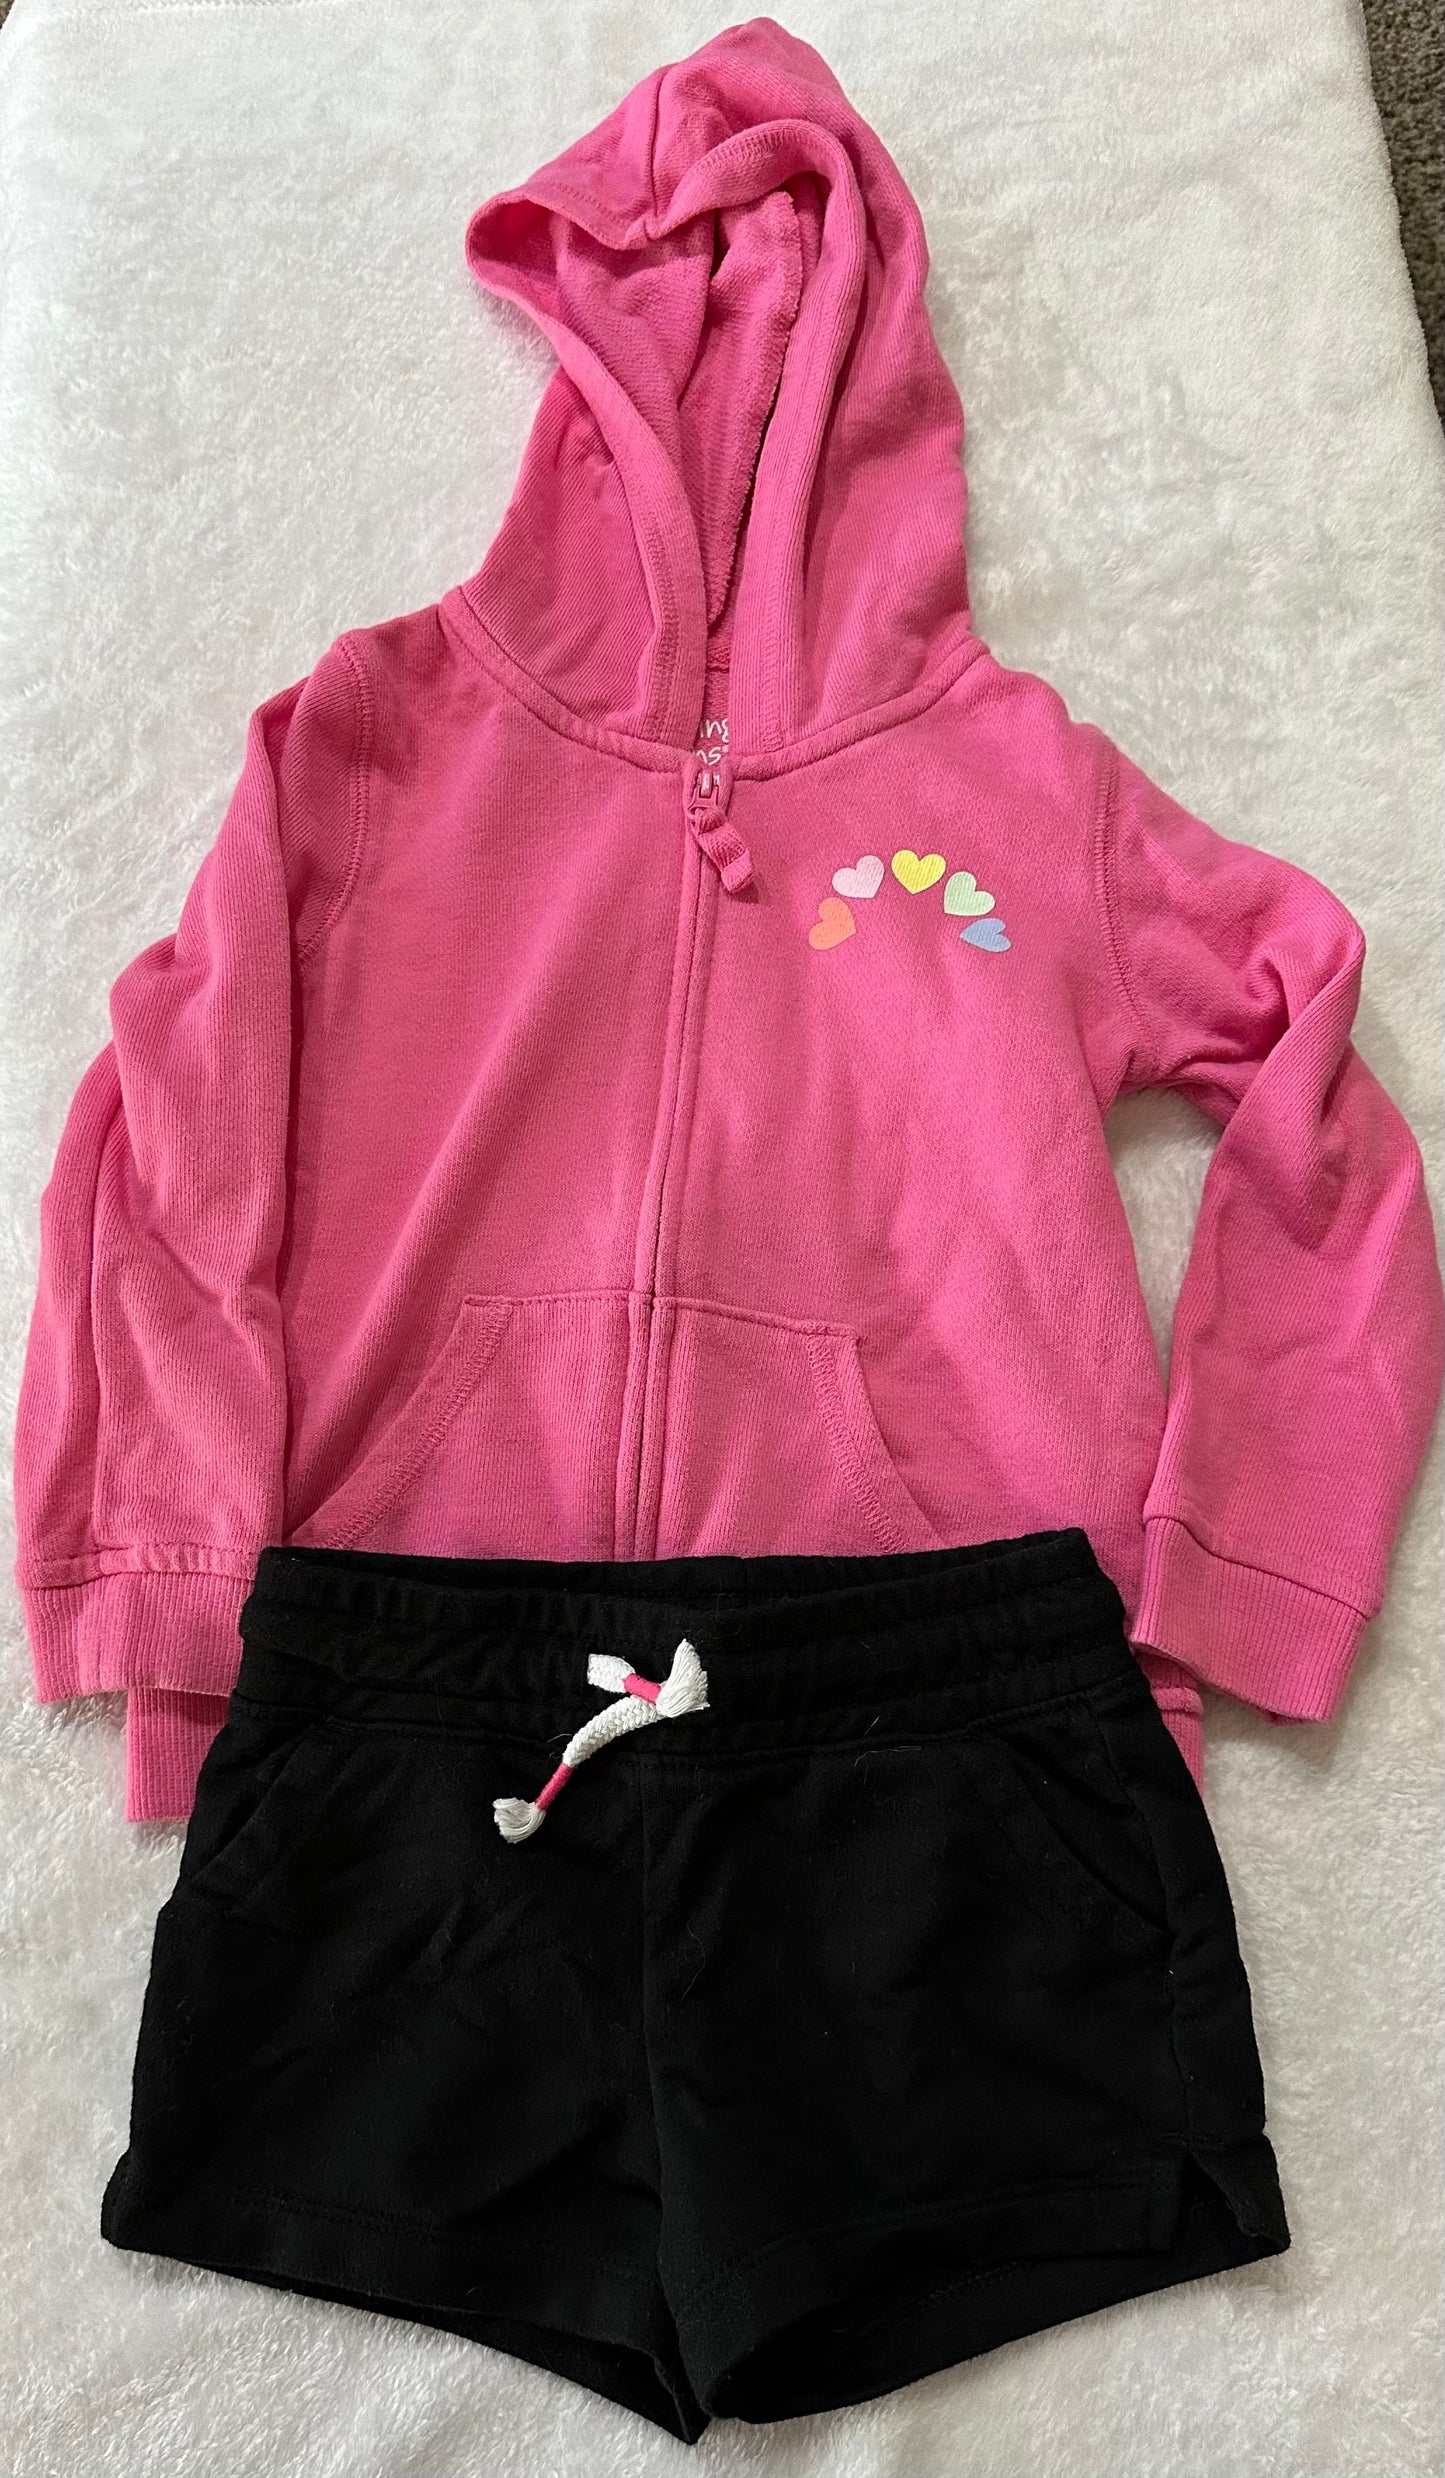 Girls 3T Jumping Beans zip up sweatshirt and Cat and Jack shorts